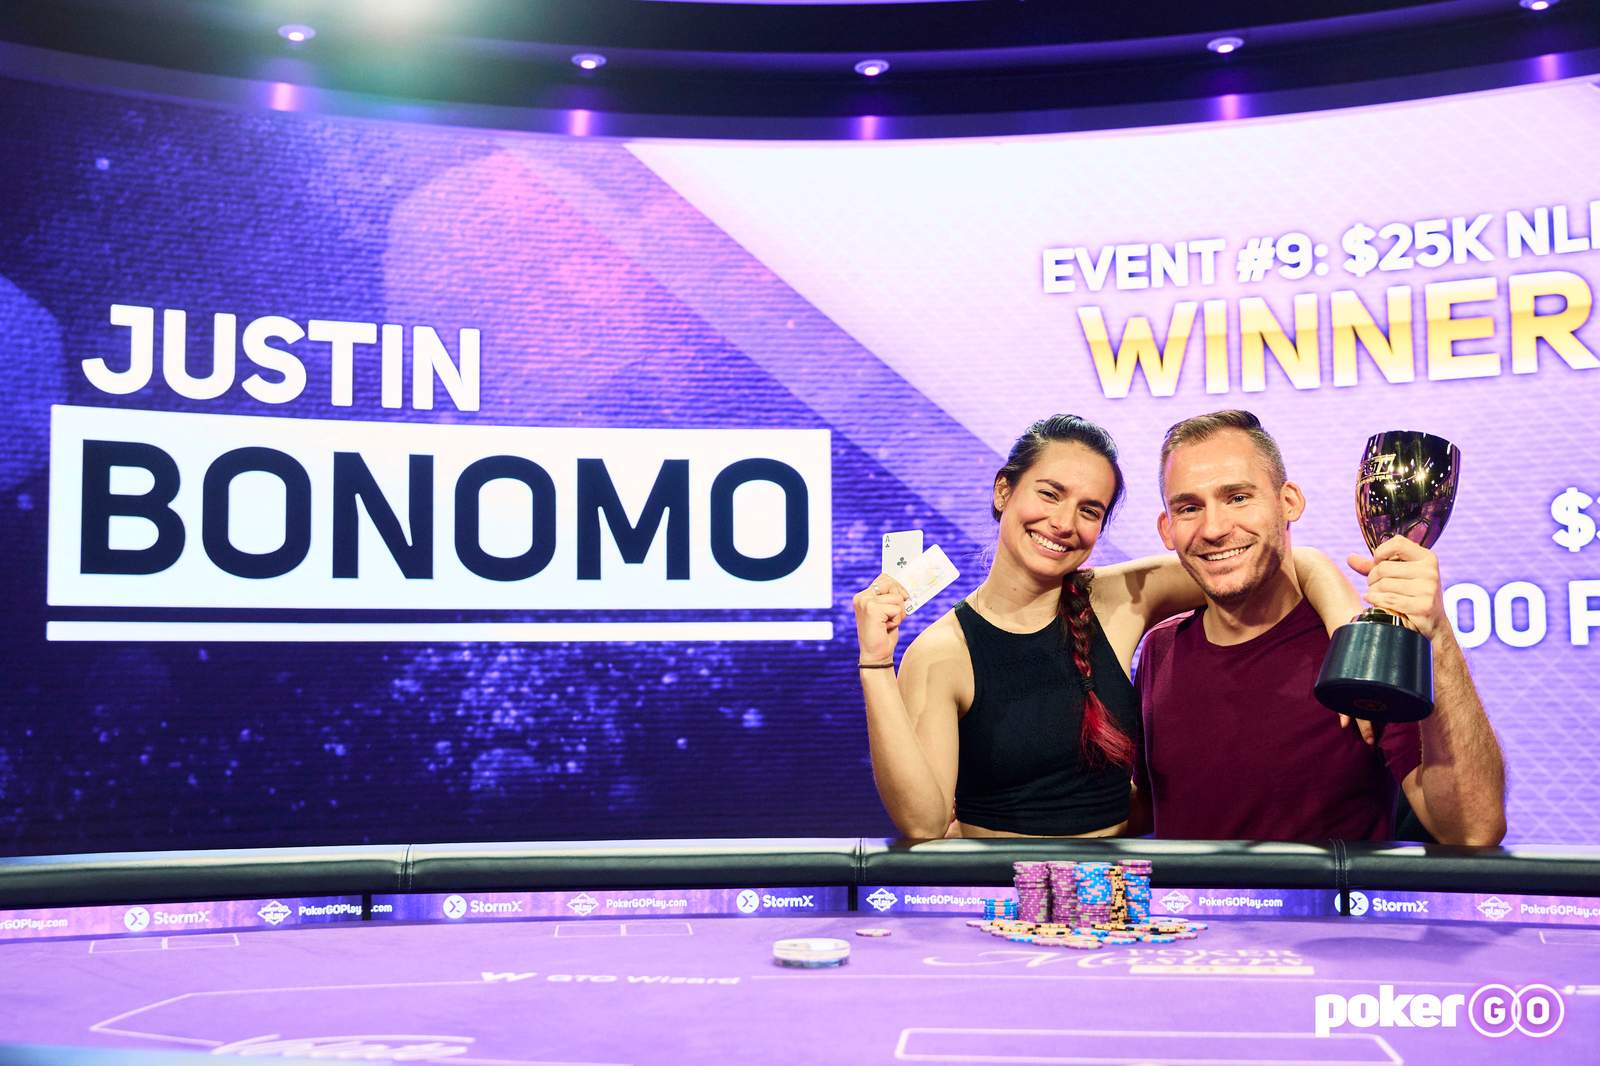 Justin Bonomo Captures His First Poker Master Title in Event #9 $25,000 No-Limit Hold'em